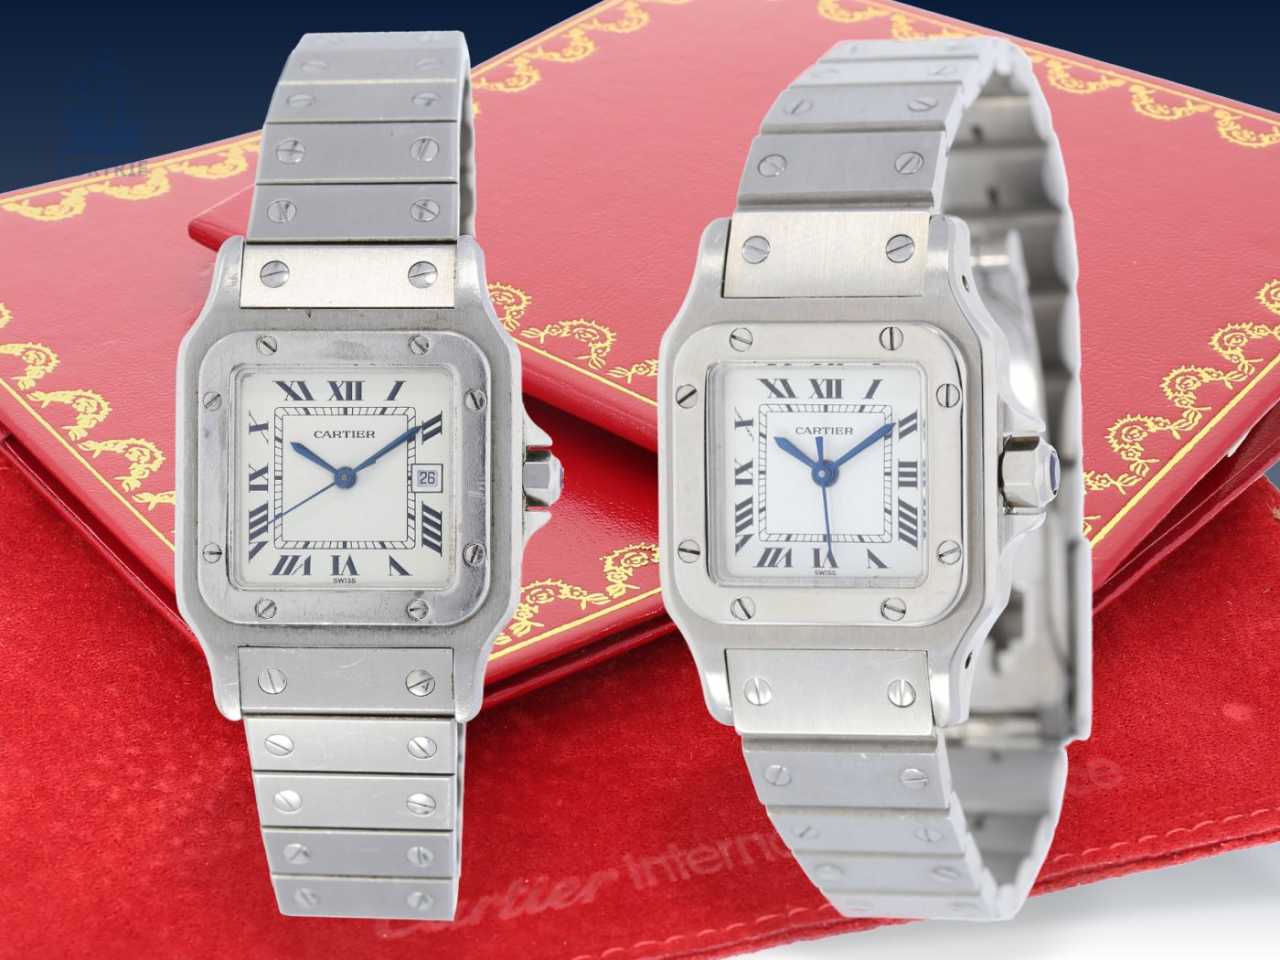 Auction: Watch: Couple of vintage watches by Cartier, mens watch ...